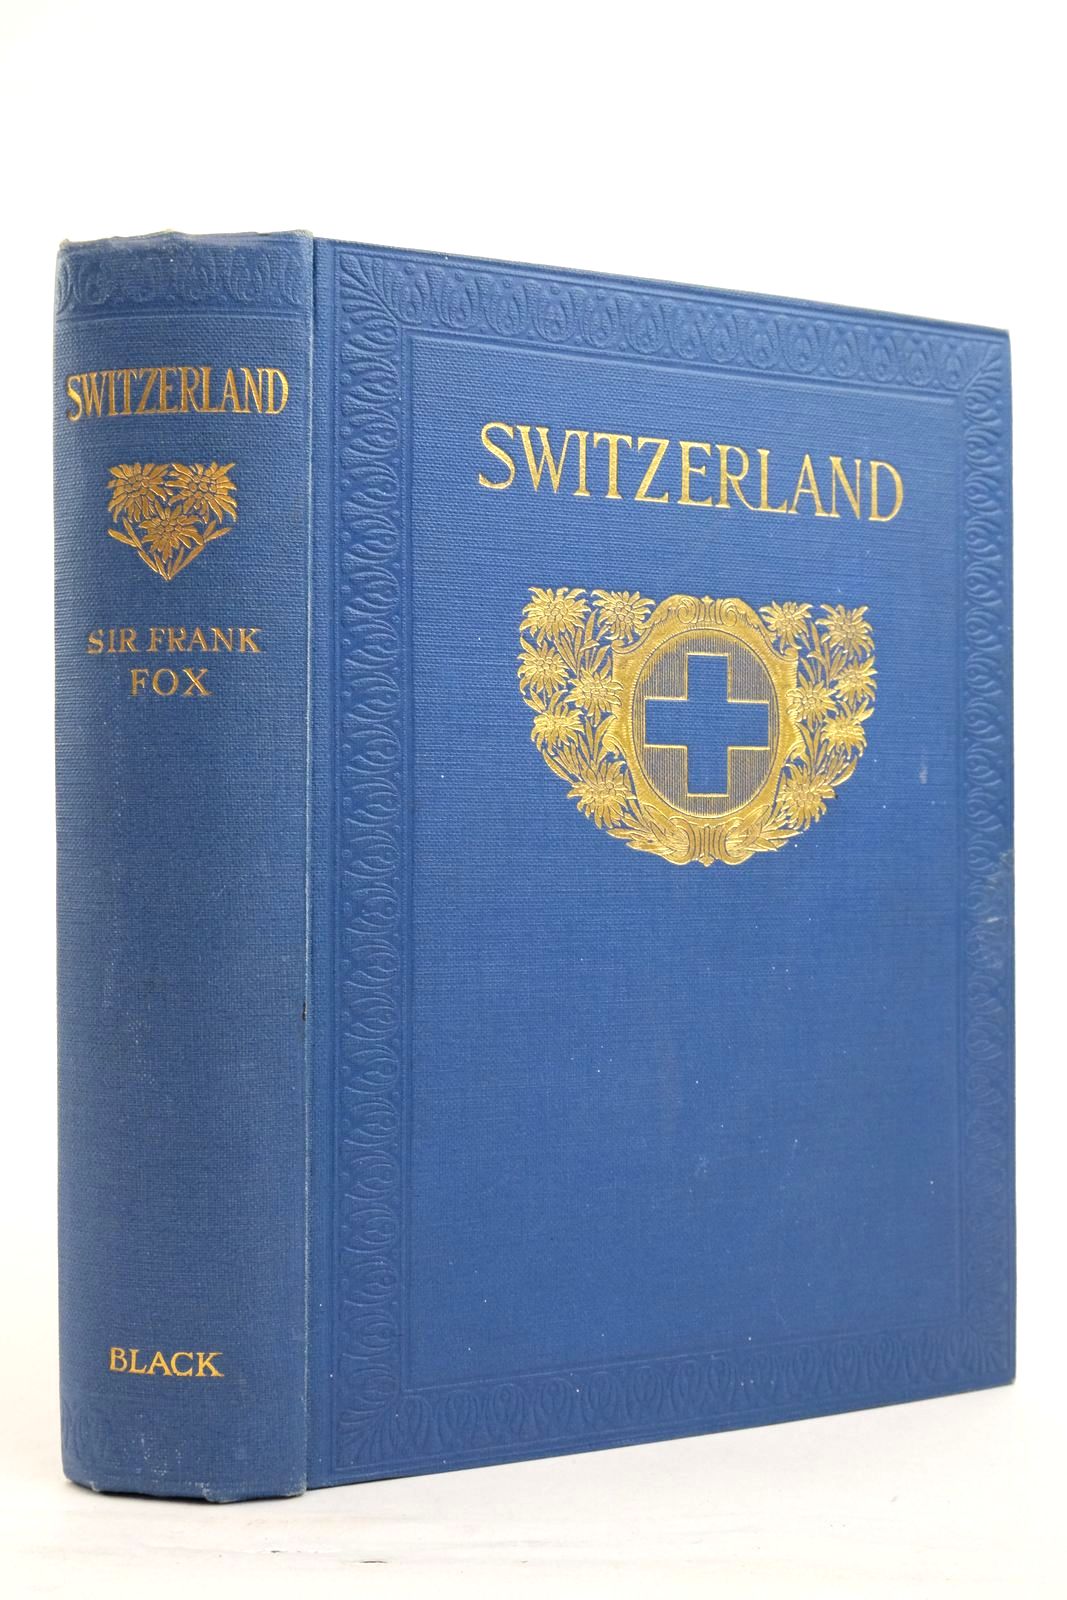 Photo of SWITZERLAND written by Fox, Frank illustrated by Lewis, J. Hardwicke
Lewis, May Hardwicke
McCormick, A.D.
et al., published by A. & C. Black Ltd. (STOCK CODE: 2137220)  for sale by Stella & Rose's Books